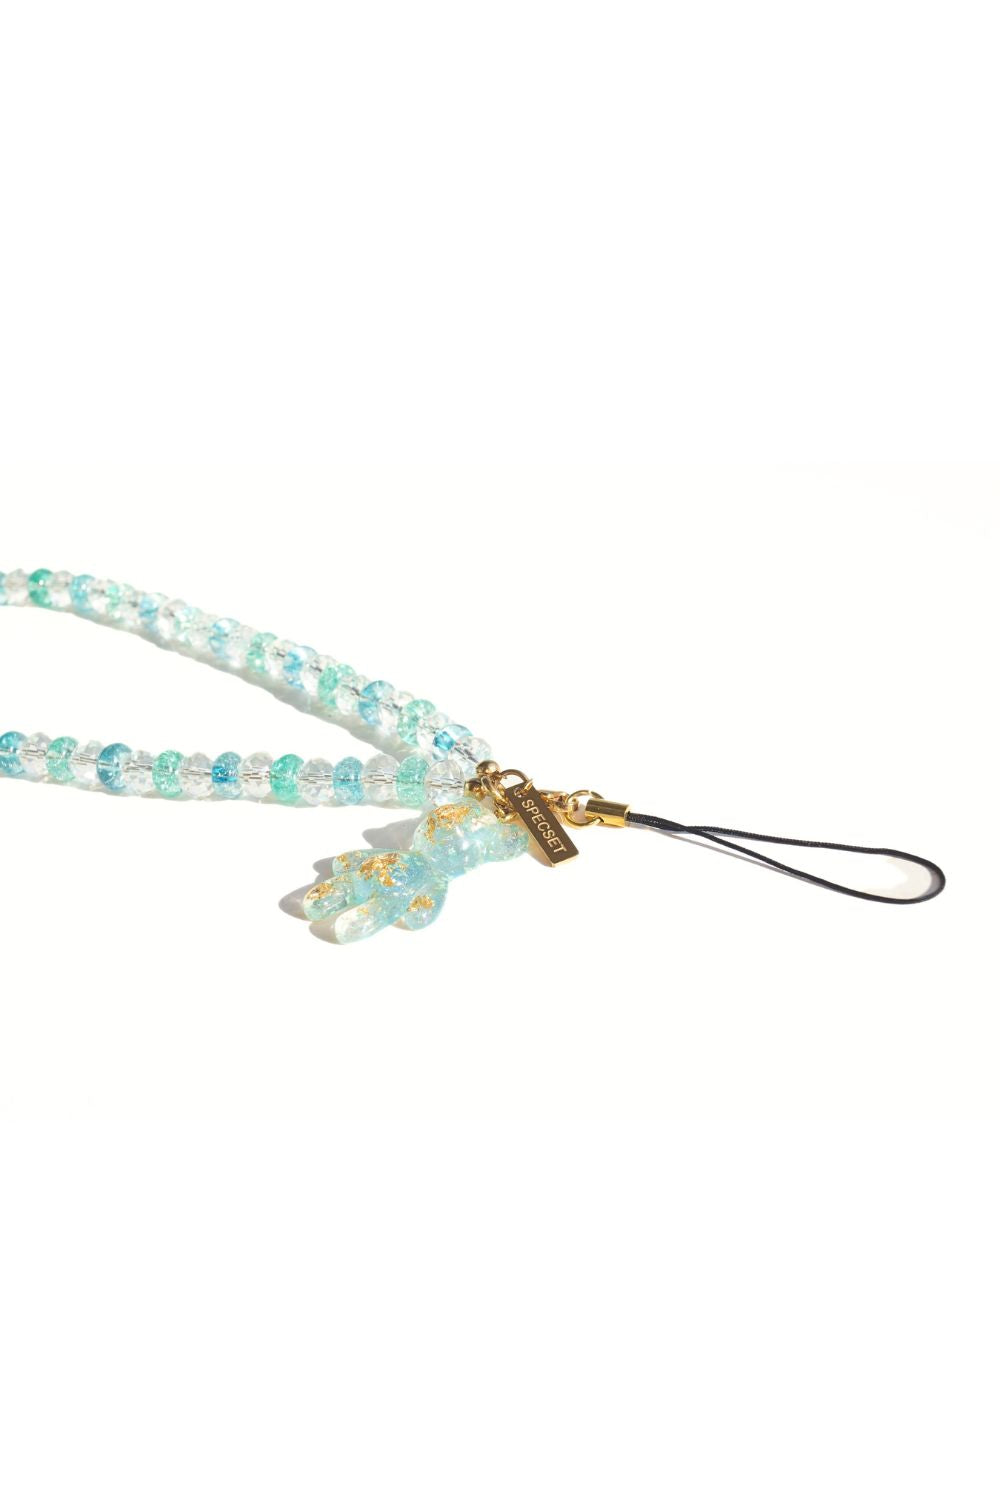 TEDDY'S GLAM - MINT Crystal Phone Strap | SPECSET